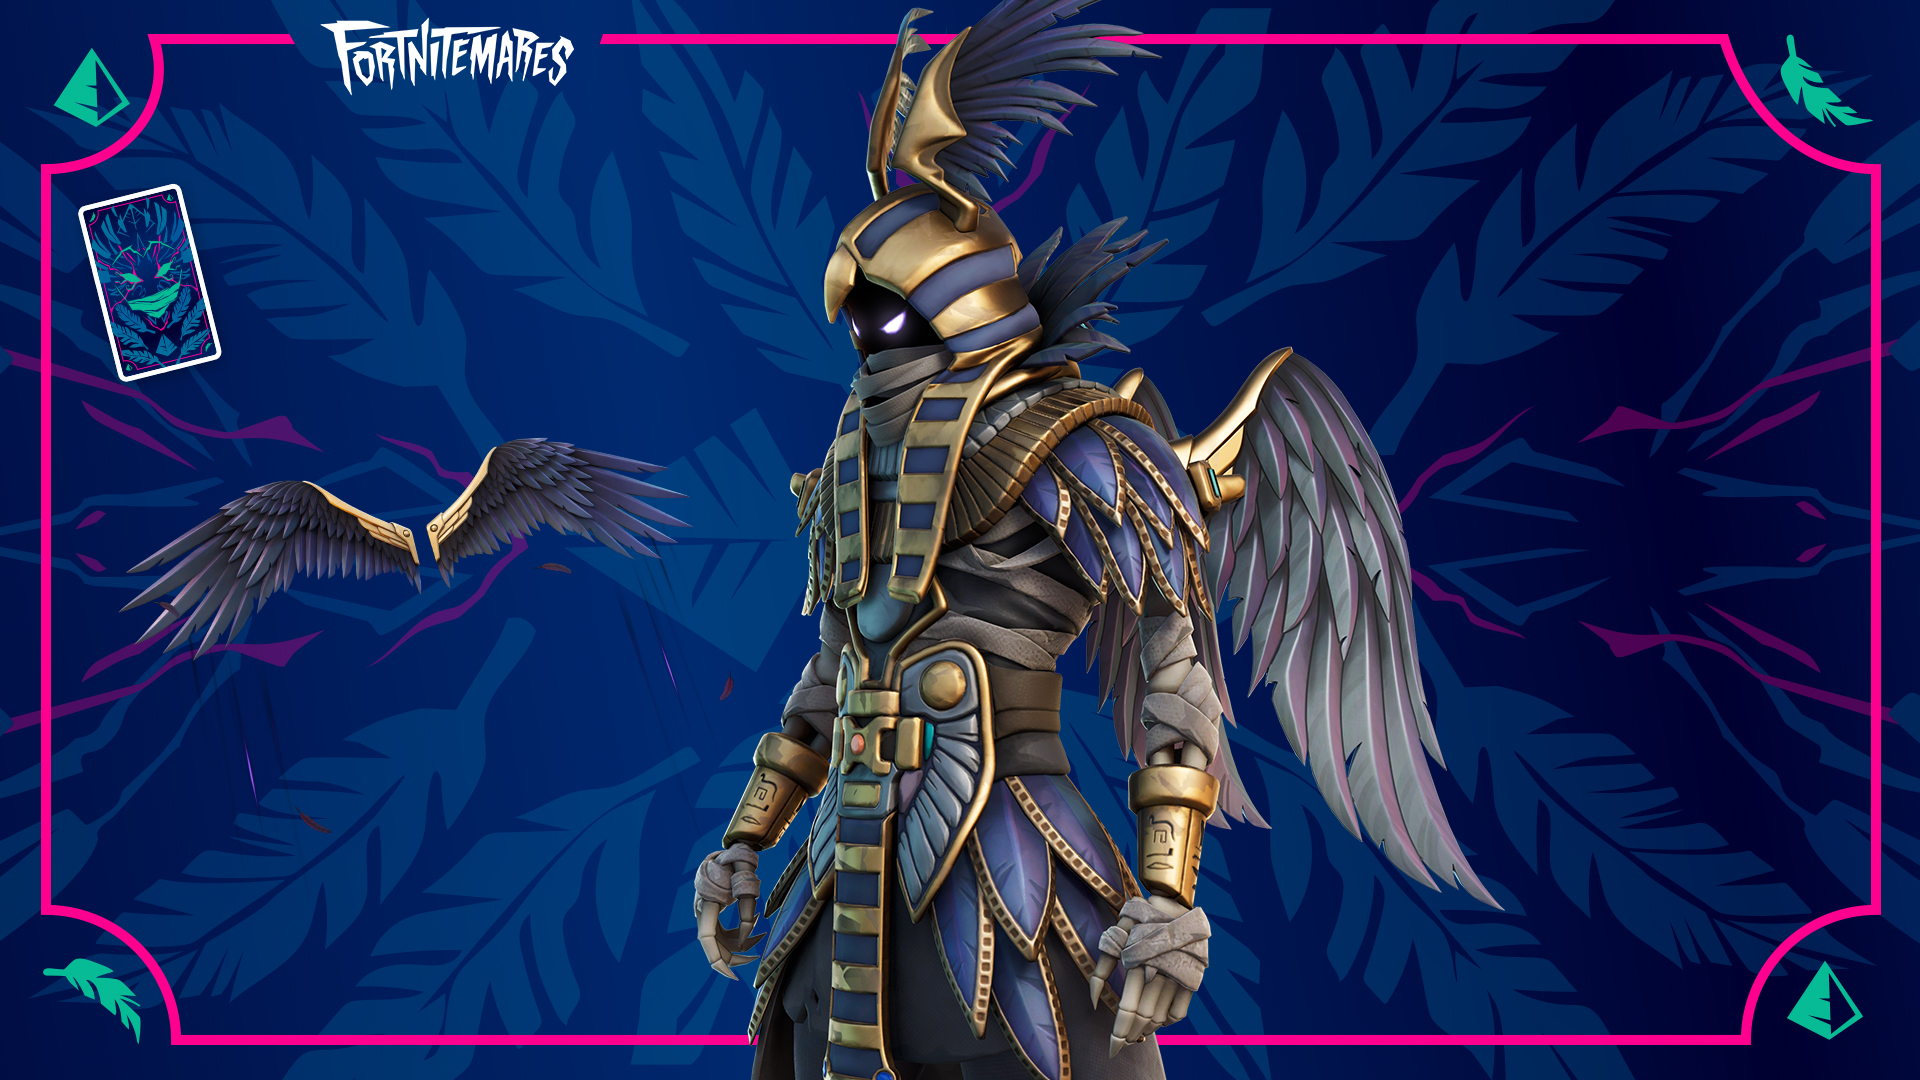 A cross between the Raven Fortnite Skin and a Pharoh from ancient egypt - with a mash of feathers and ancient garb